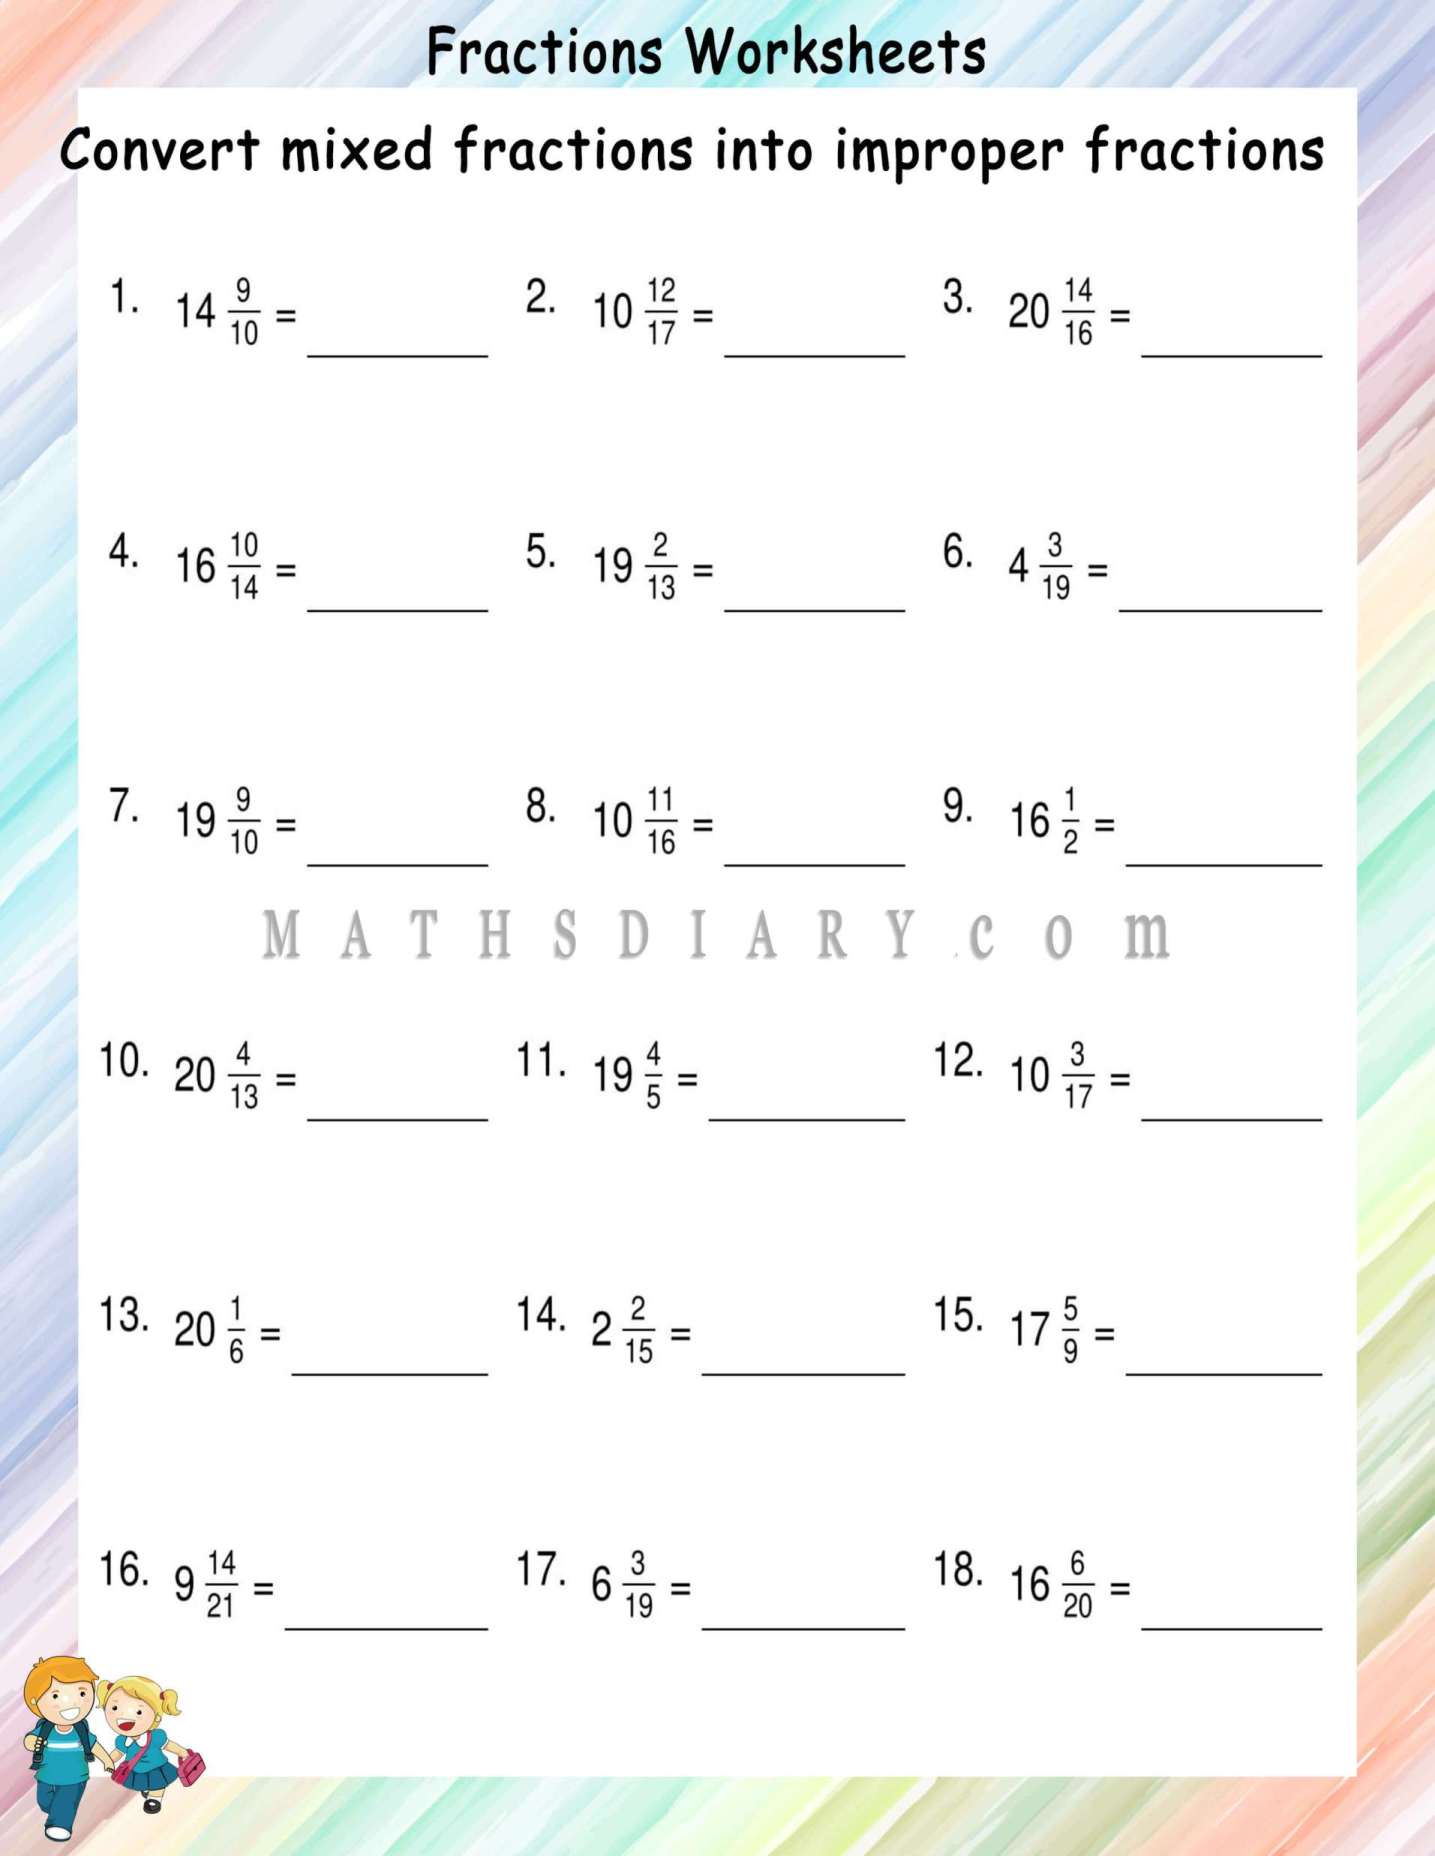 convert-mixed-fractions-to-improper-fractions-worksheets-math